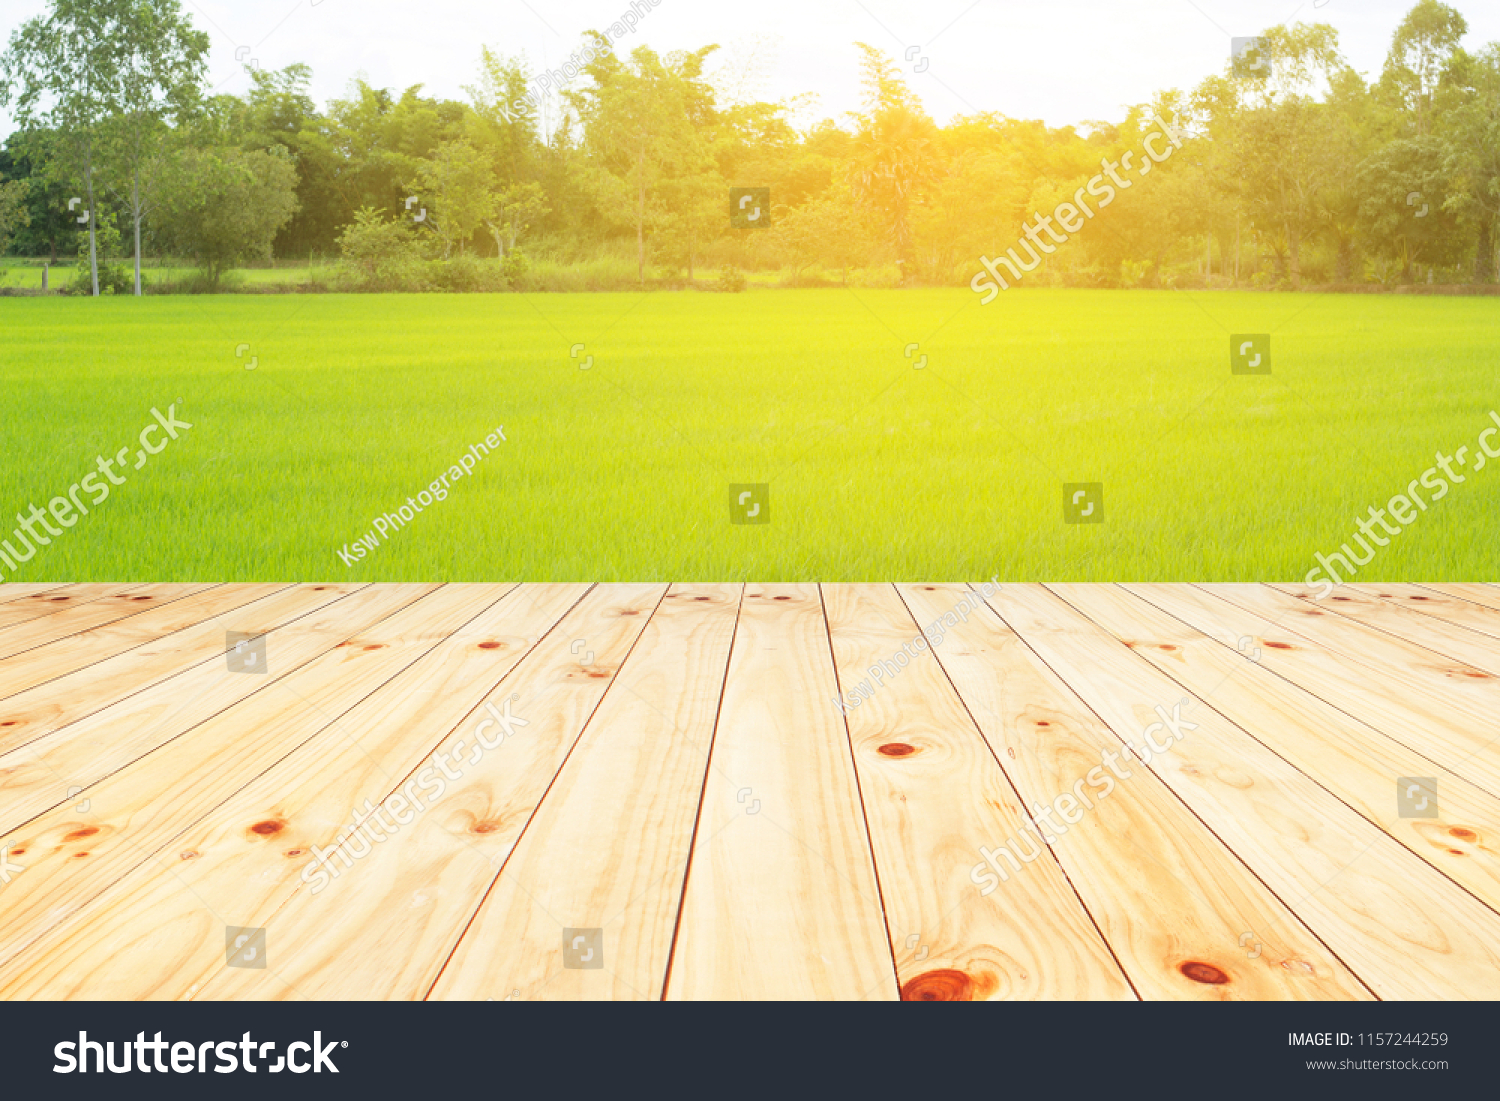 wooden floor on green rice field background with sunrise #1157244259